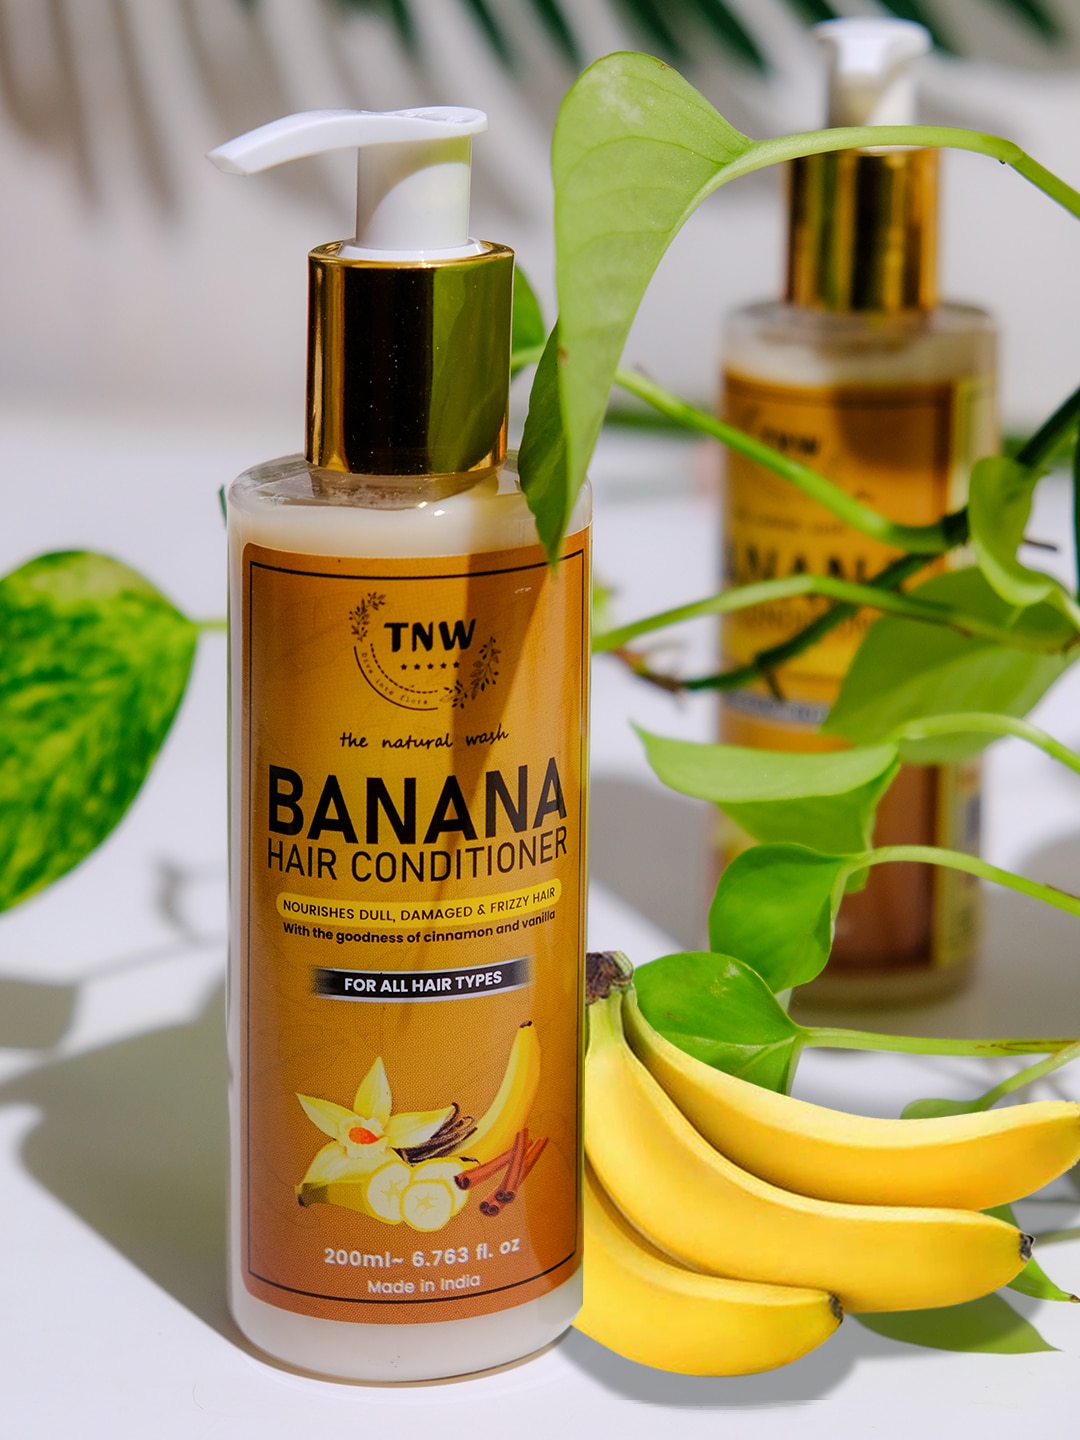 TNW The Natural Wash Banana Hair Conditioner 200 ml Price in India